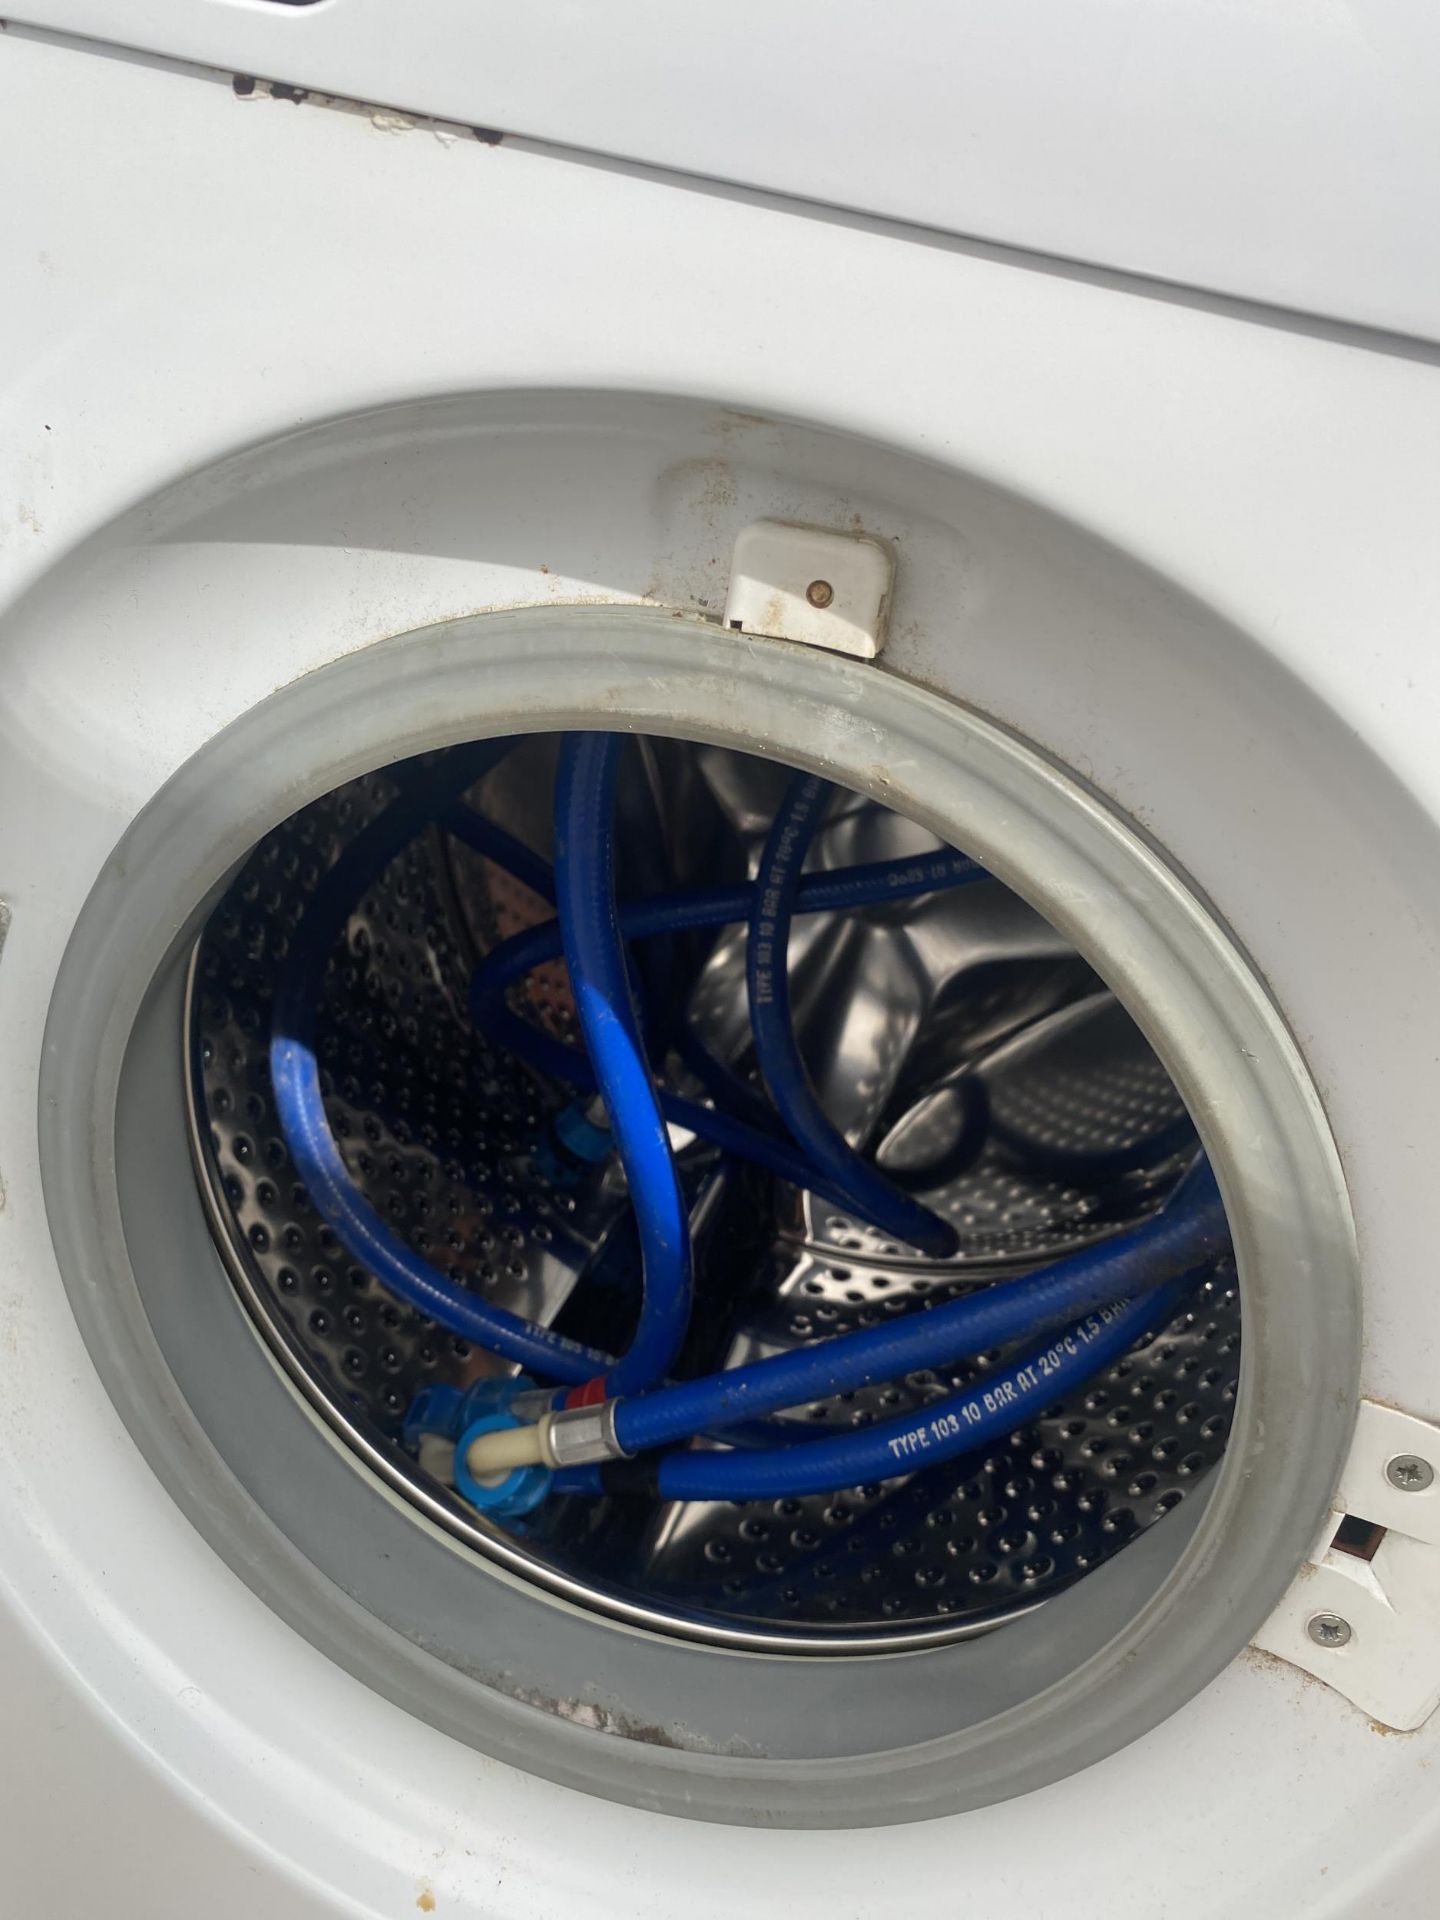 A WHITE CREDA WASHING MACHINE BELIEVED IN GOOD WORKING ORDER BUT NO WARRANTY GIVEN - Image 3 of 4